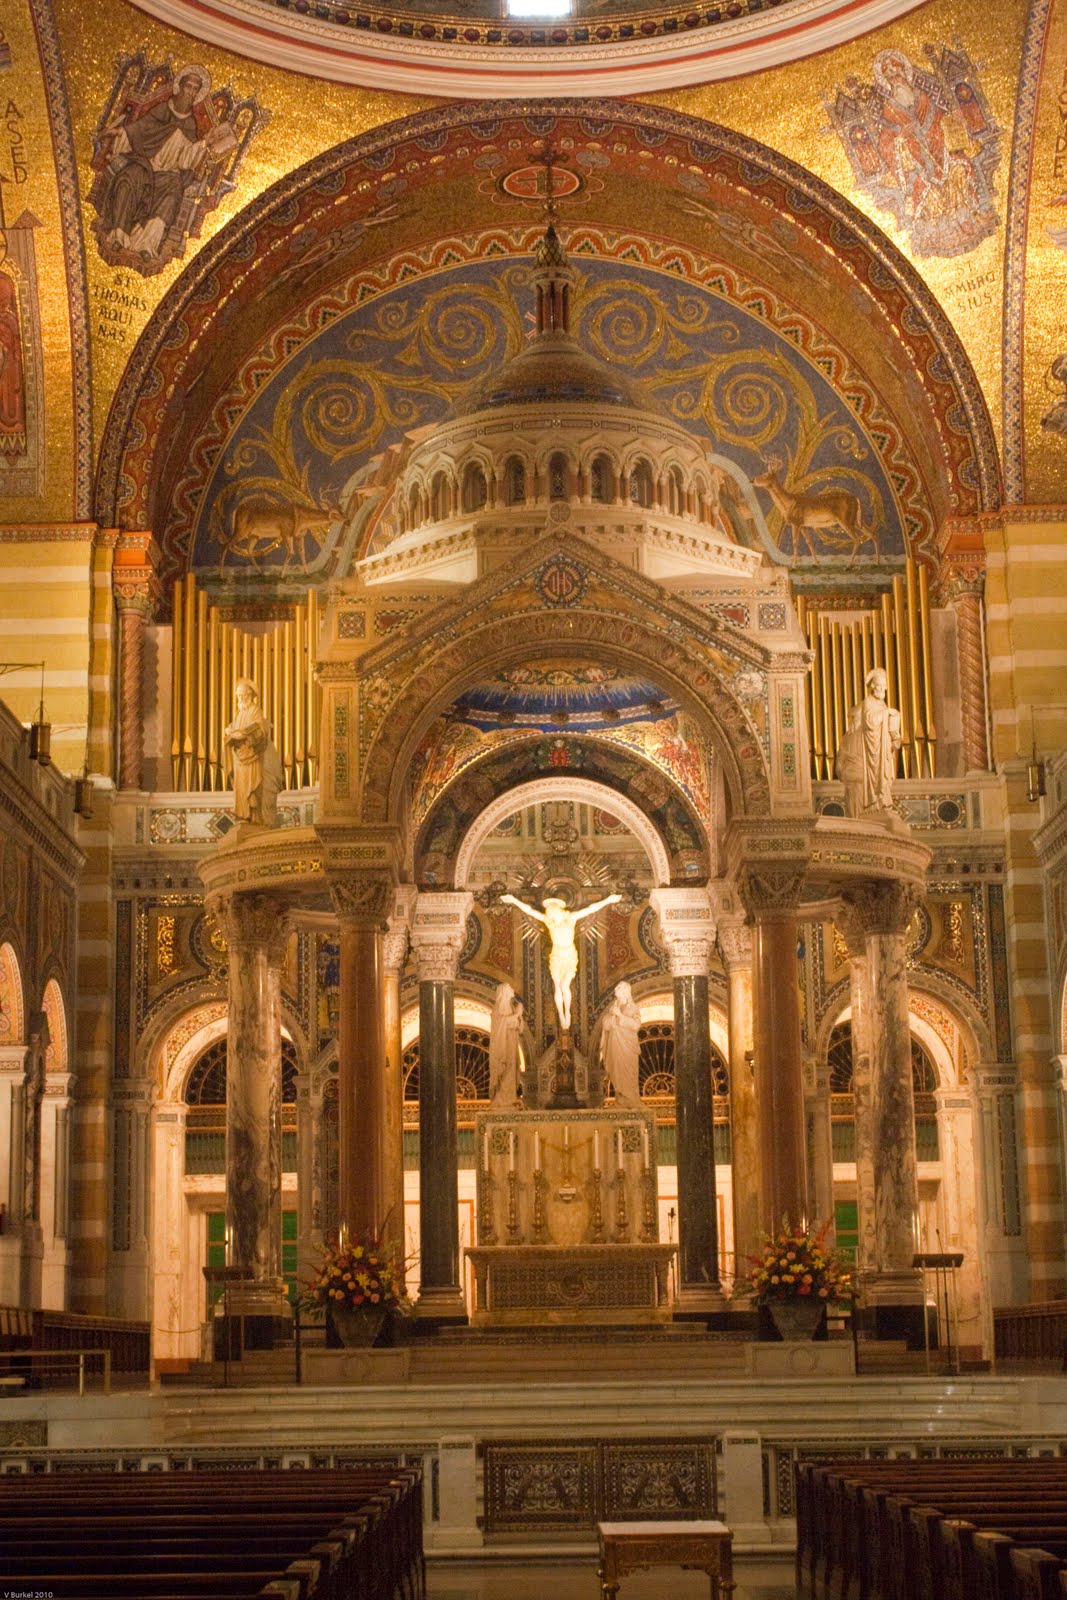 Digital Postcards: The Cathedral Basilica of Saint Louis